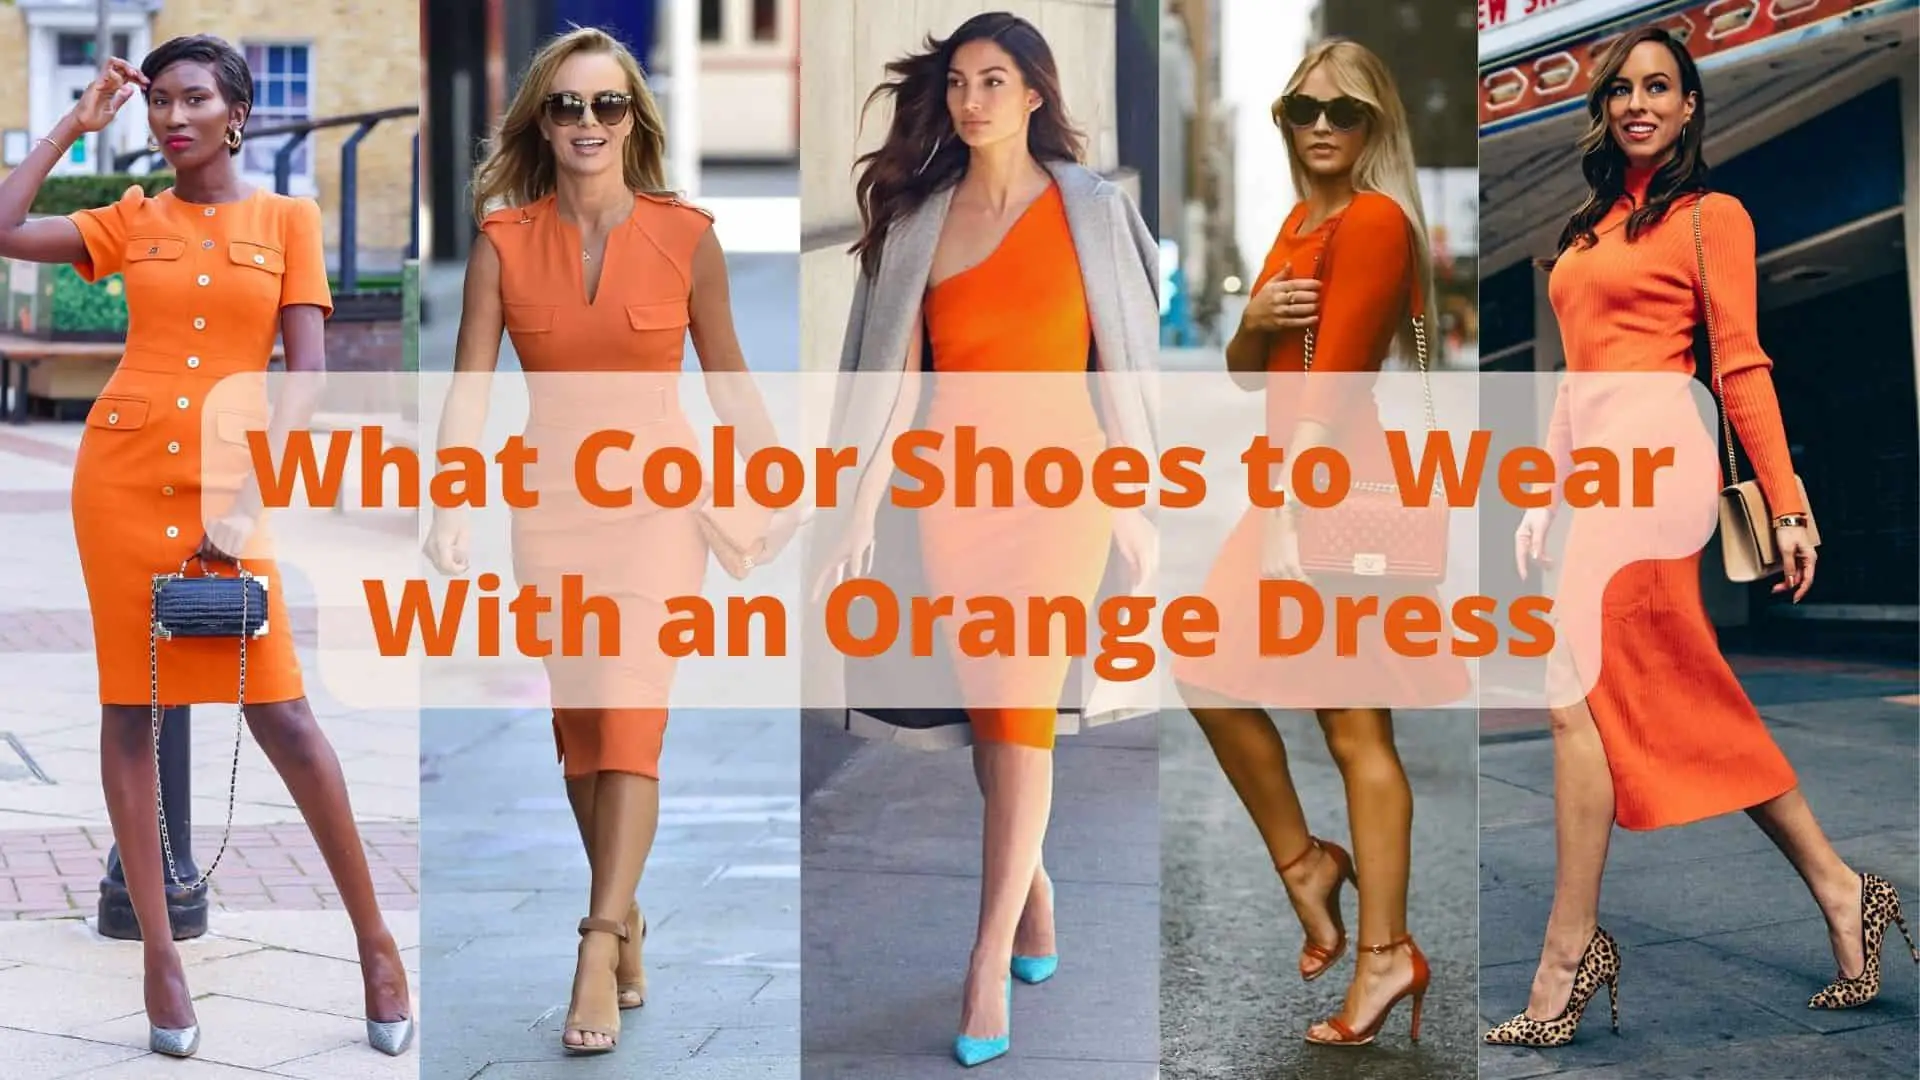 What Color Shoes to Wear with an Orange Dress